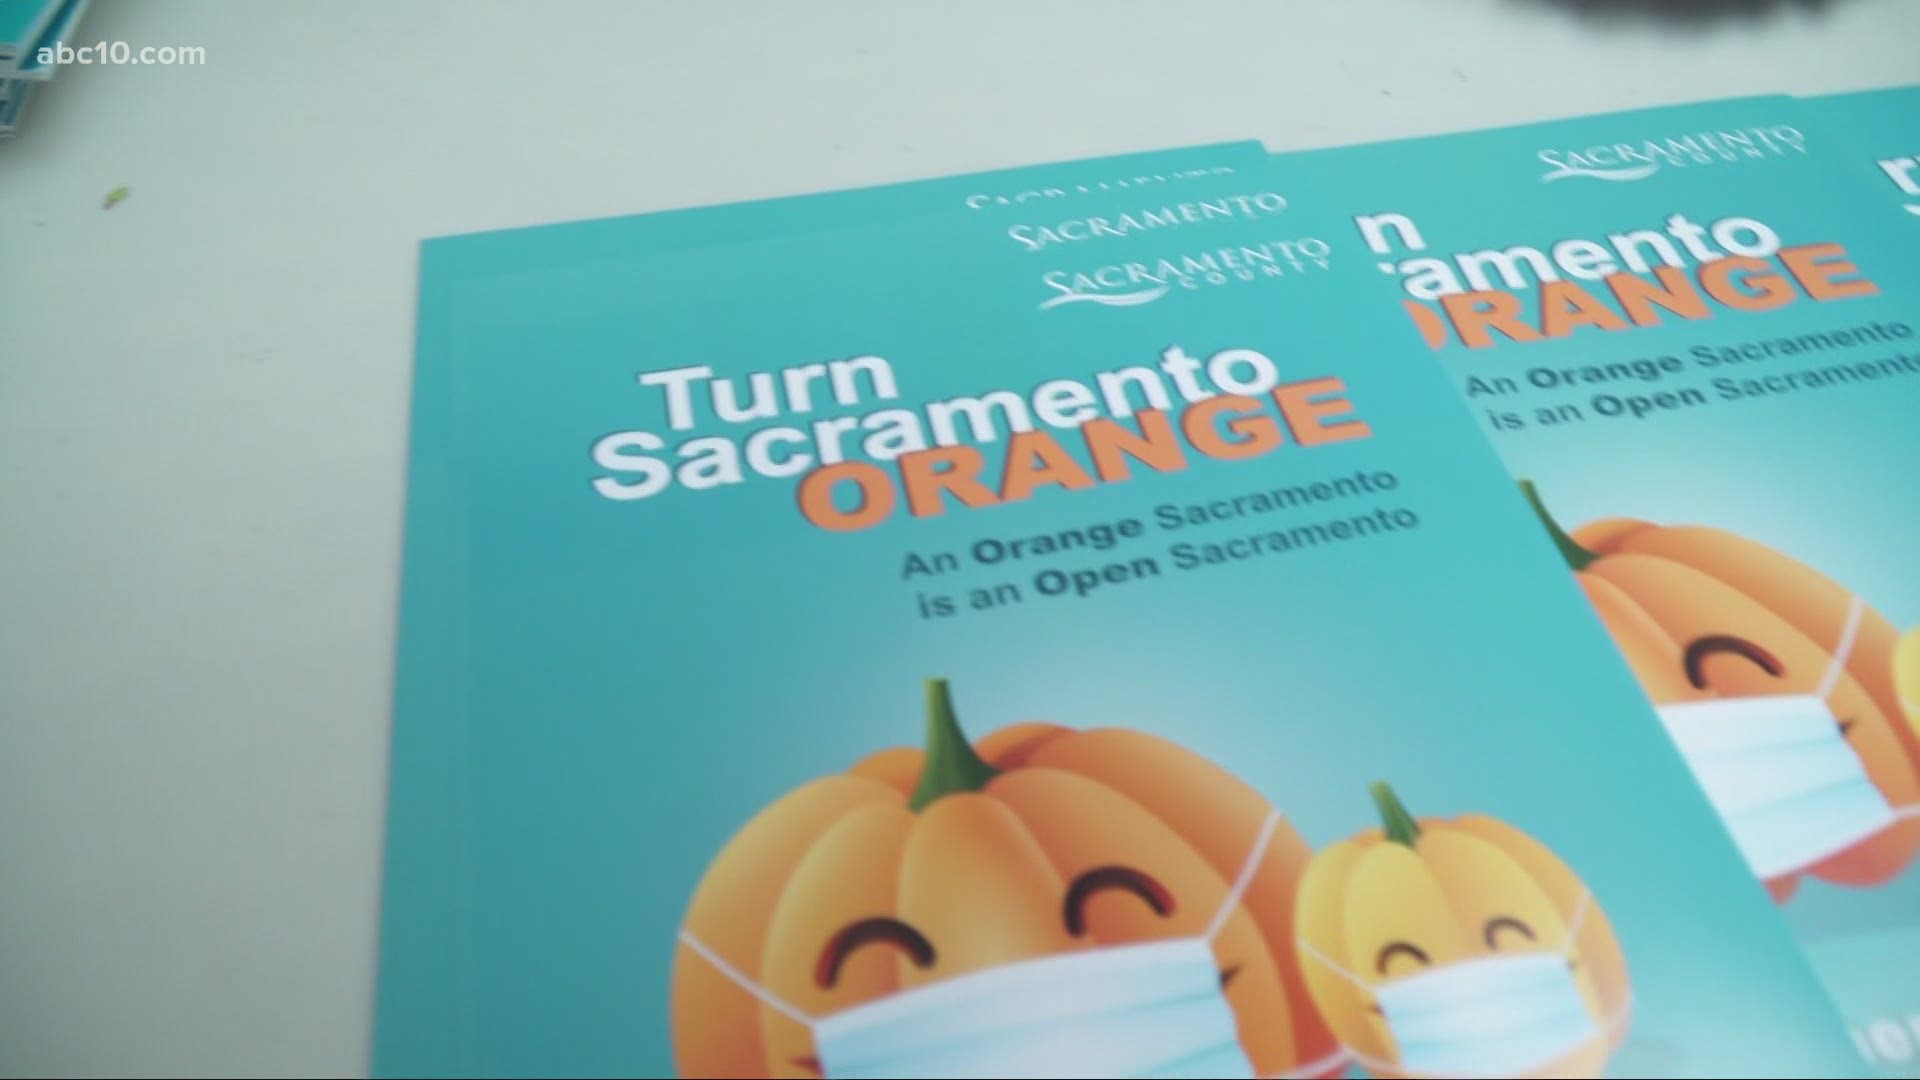 To make the orange tier, Sacramento County would need to have only four cases per 100,000 people over a seven-day period.